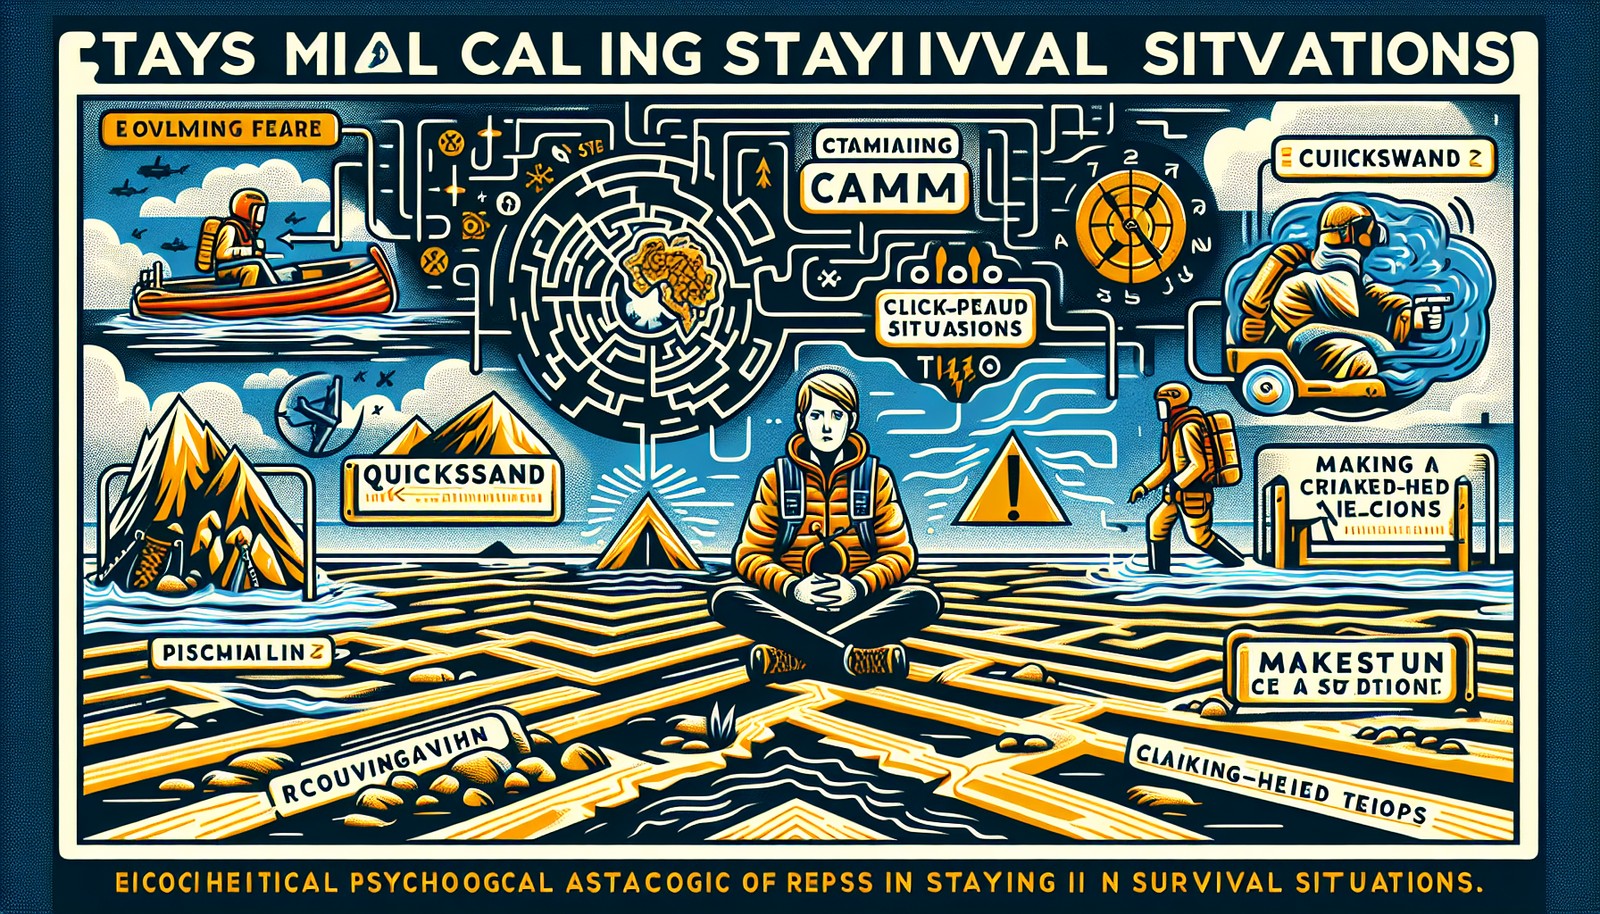 Psychological tips for staying calm in survival situations